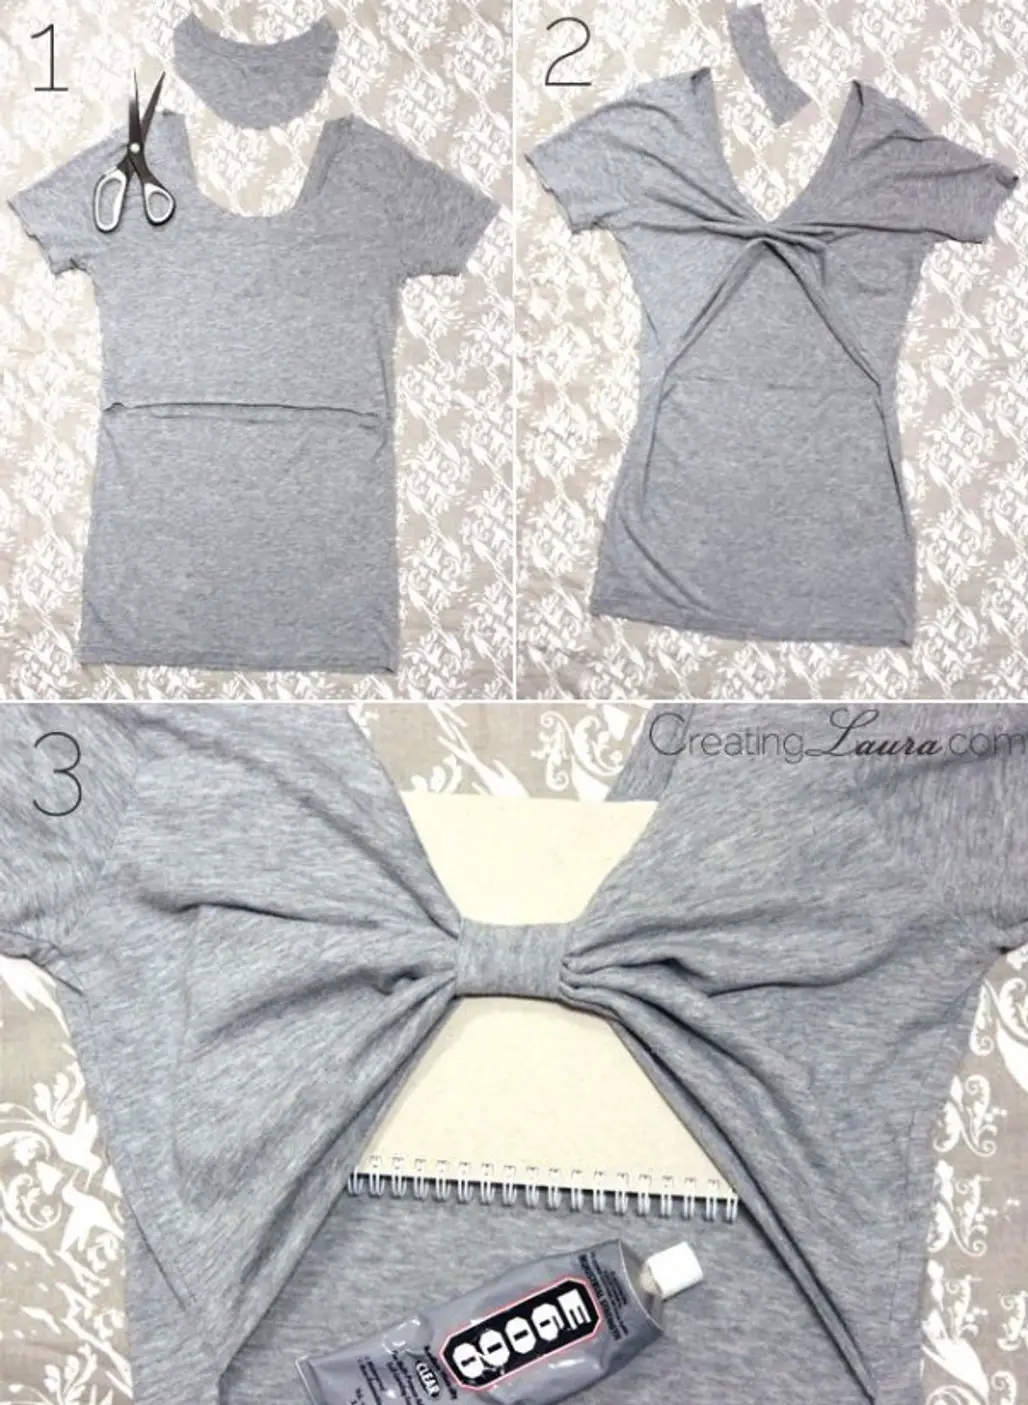 Bow-Back Tank Top